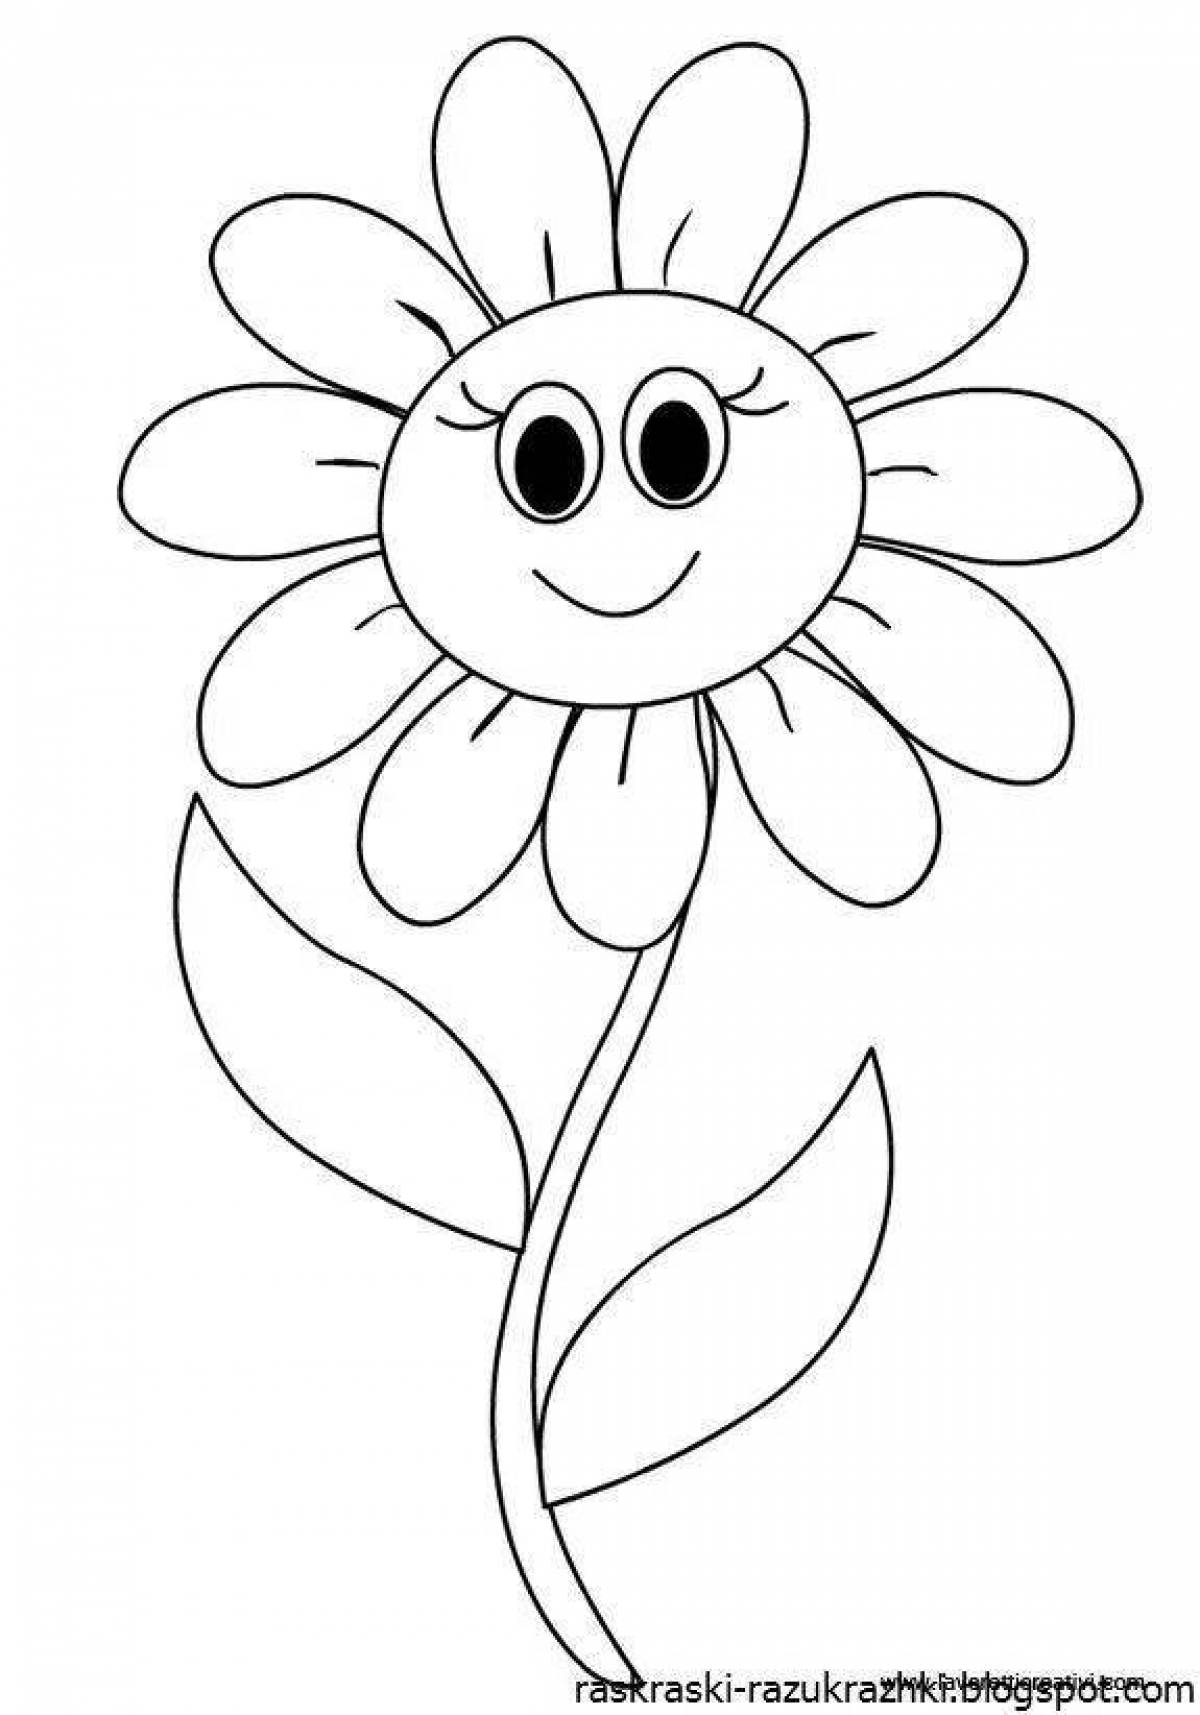 Coloring flower